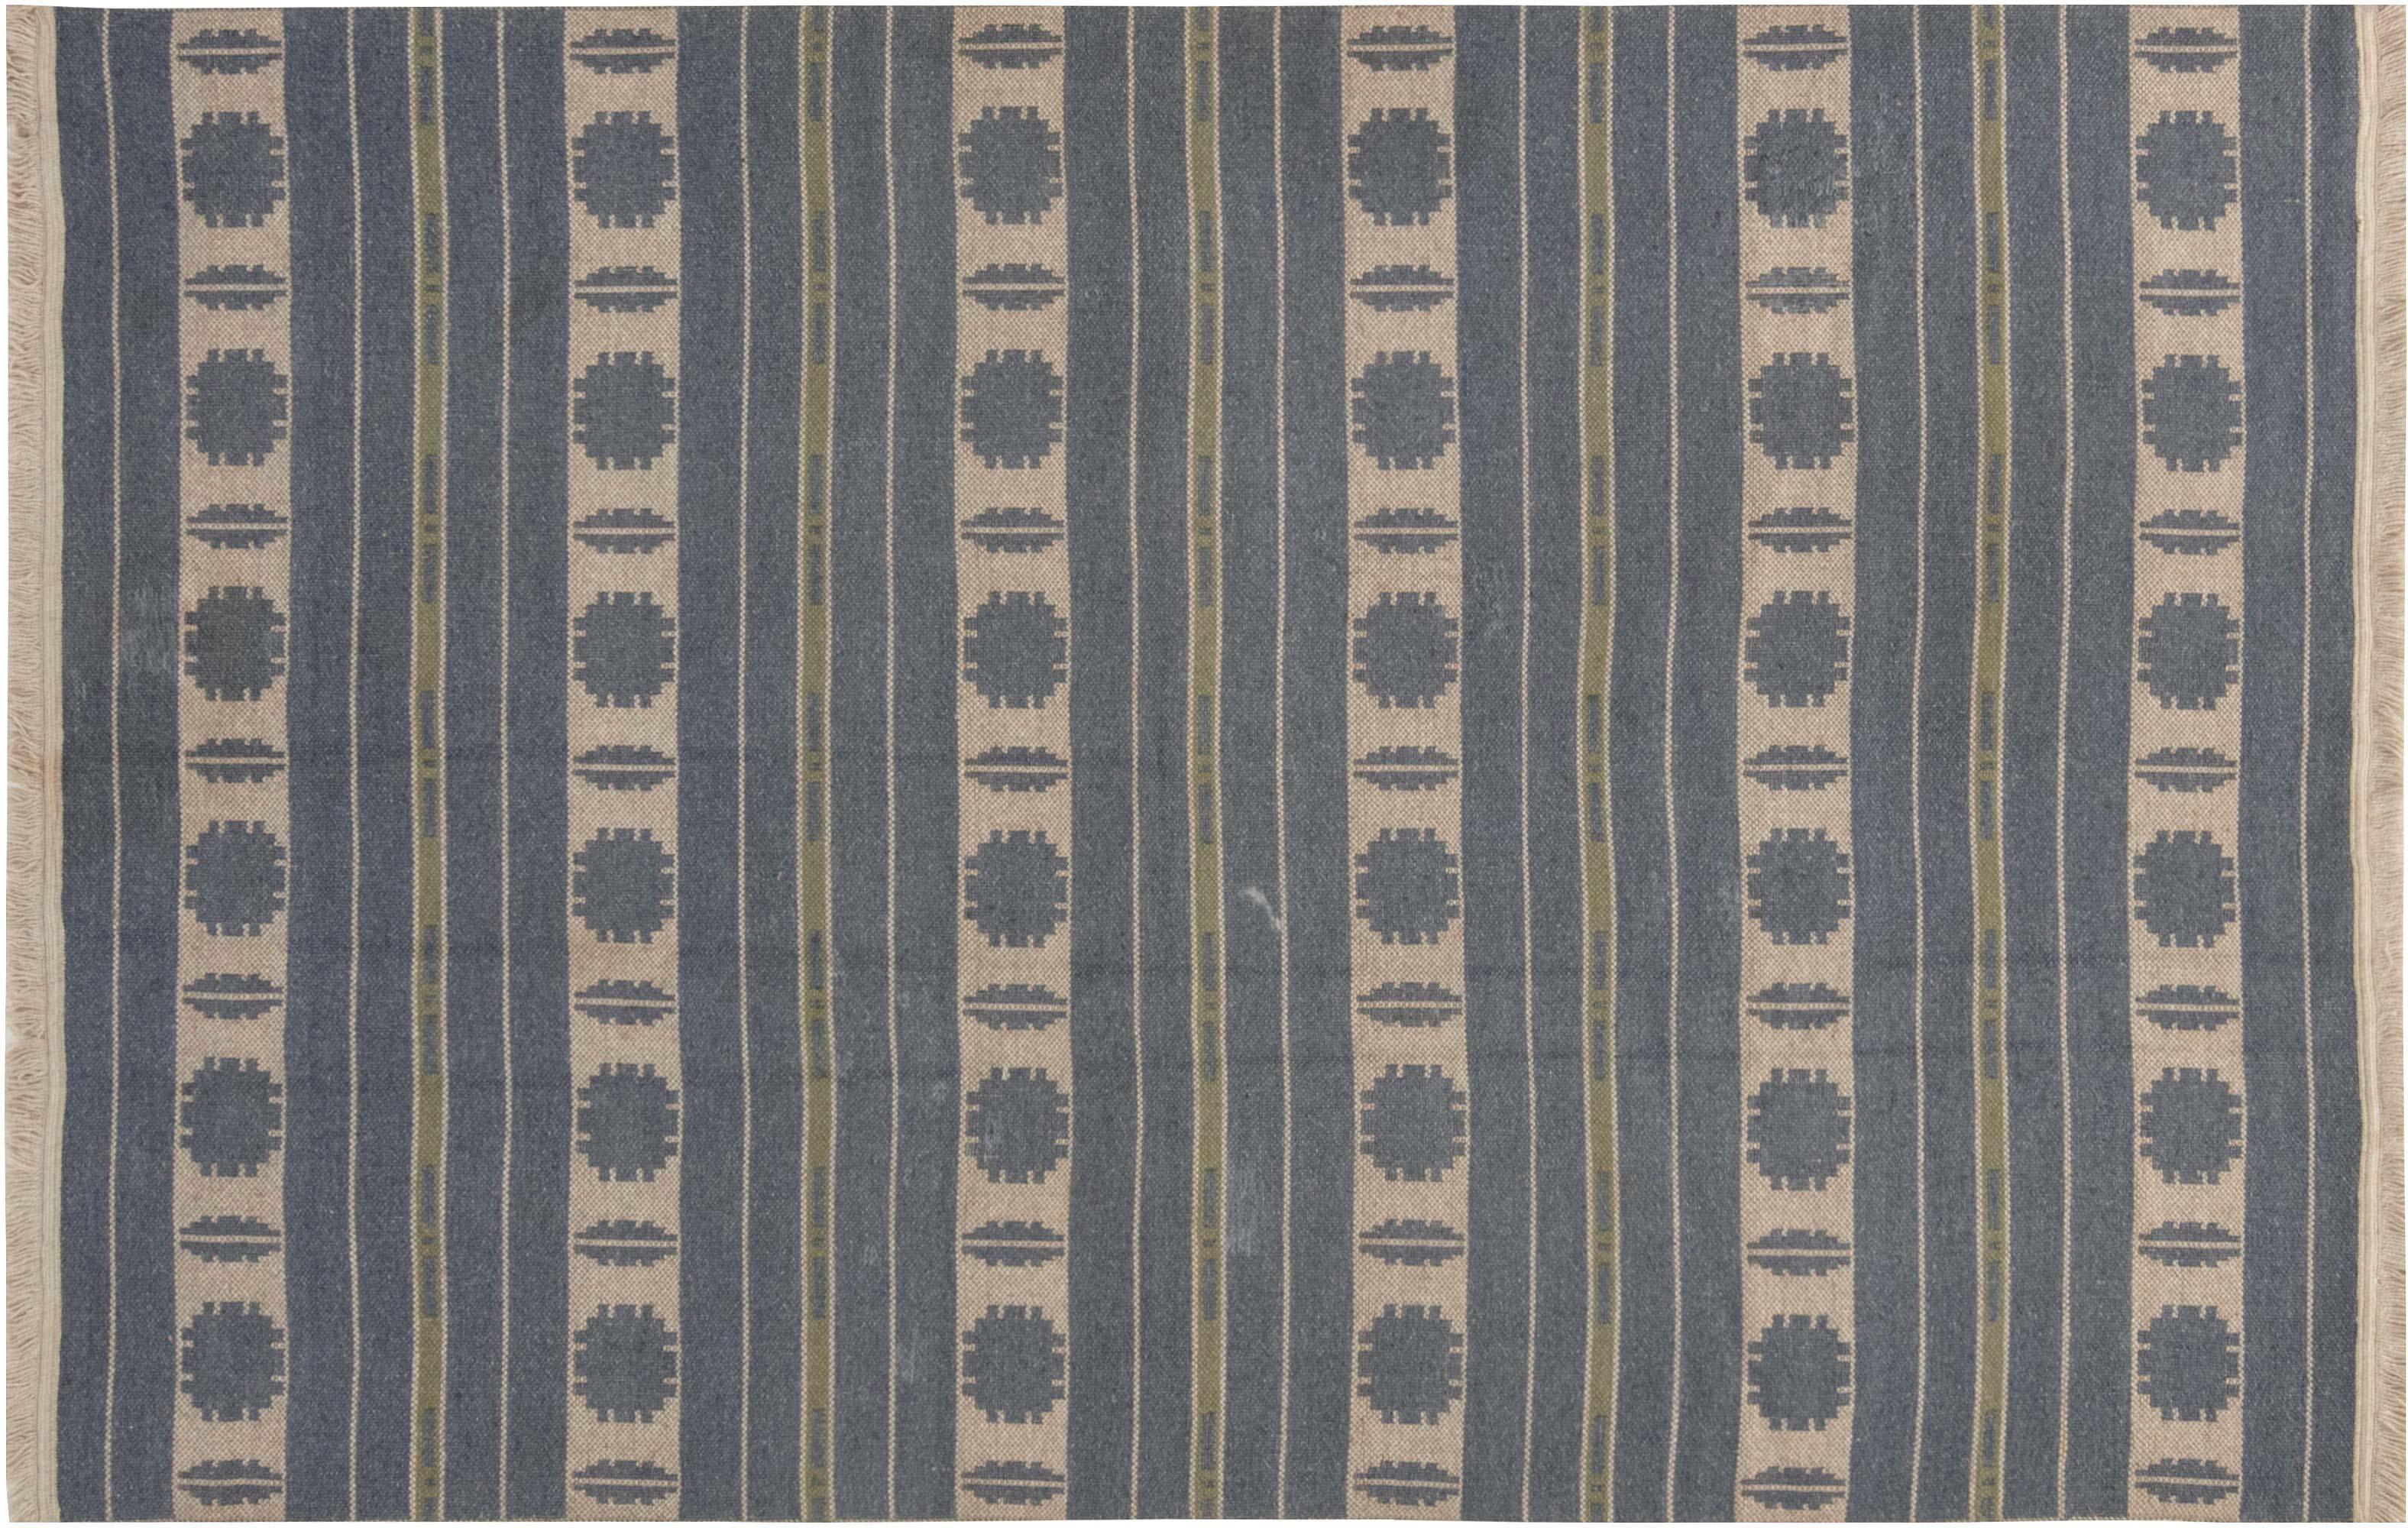 Midcentury Swedish beige, blue and green double sided flat-woven wool rug by Doris Leslie Blau
Size: 5'2